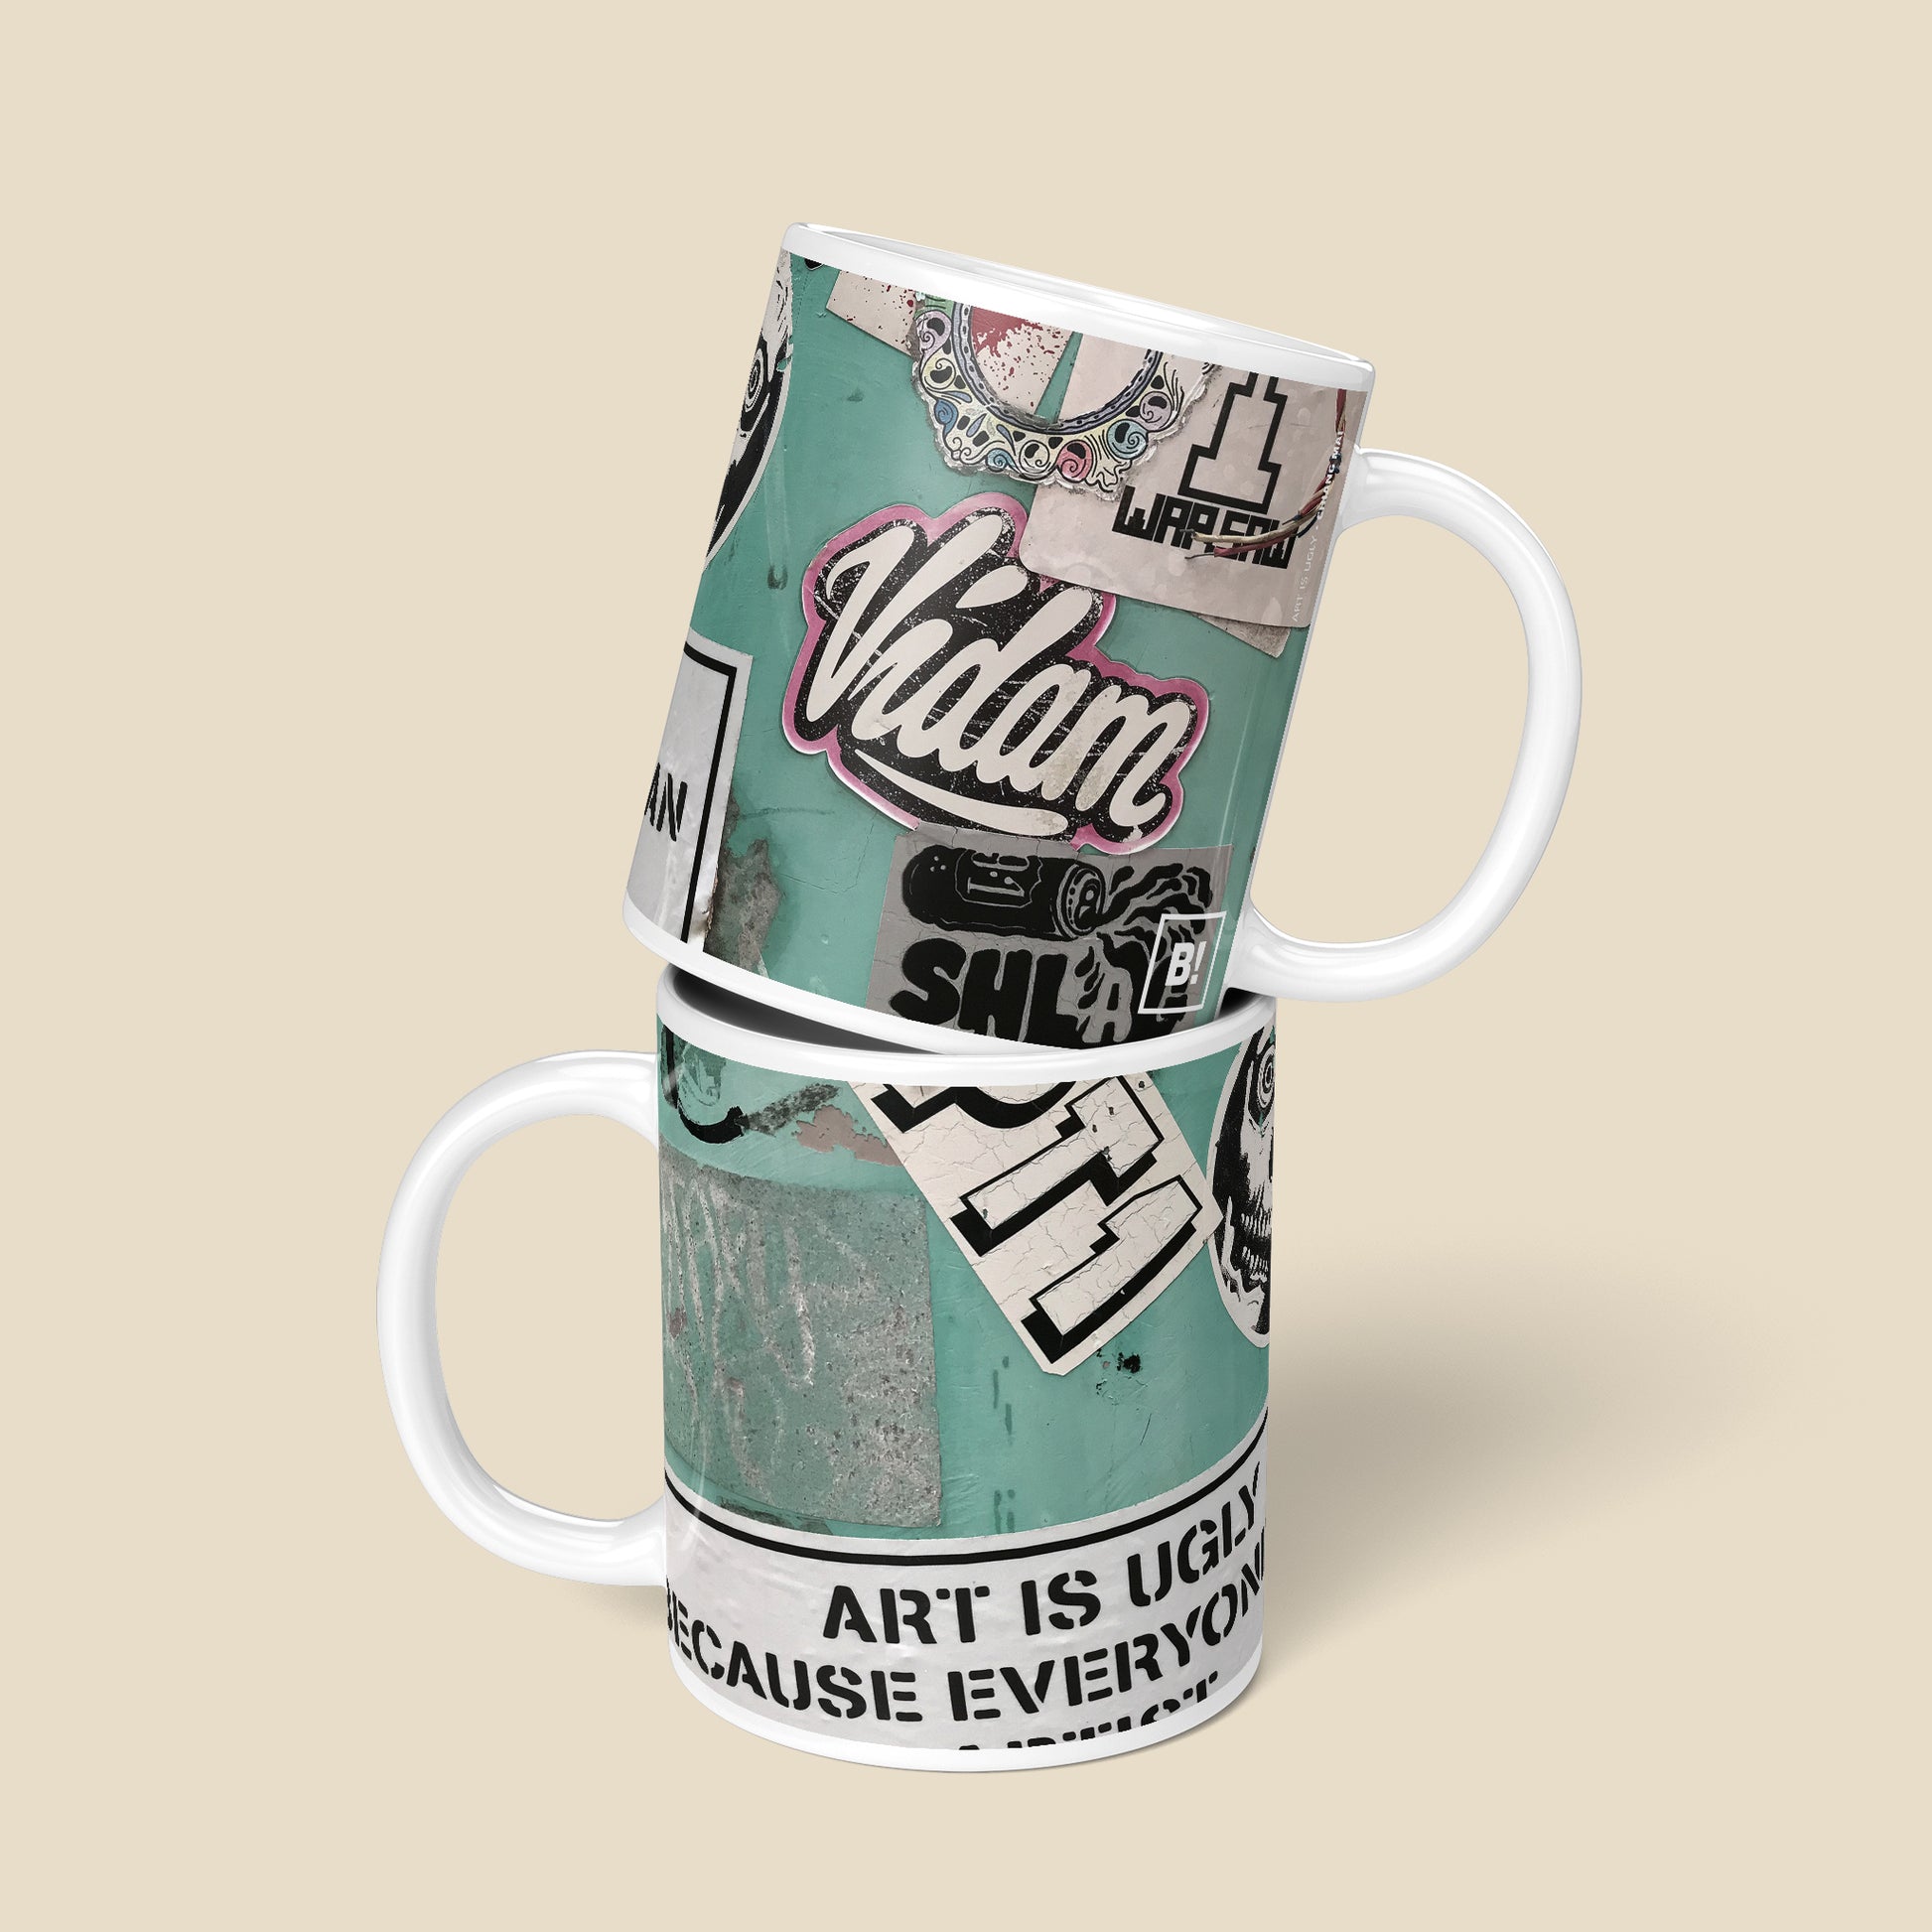 Be inspired by our Urban Art Coffee Mug "Art Is Ugly" from Bangkok. This mug features an 11oz size with a front and back view.